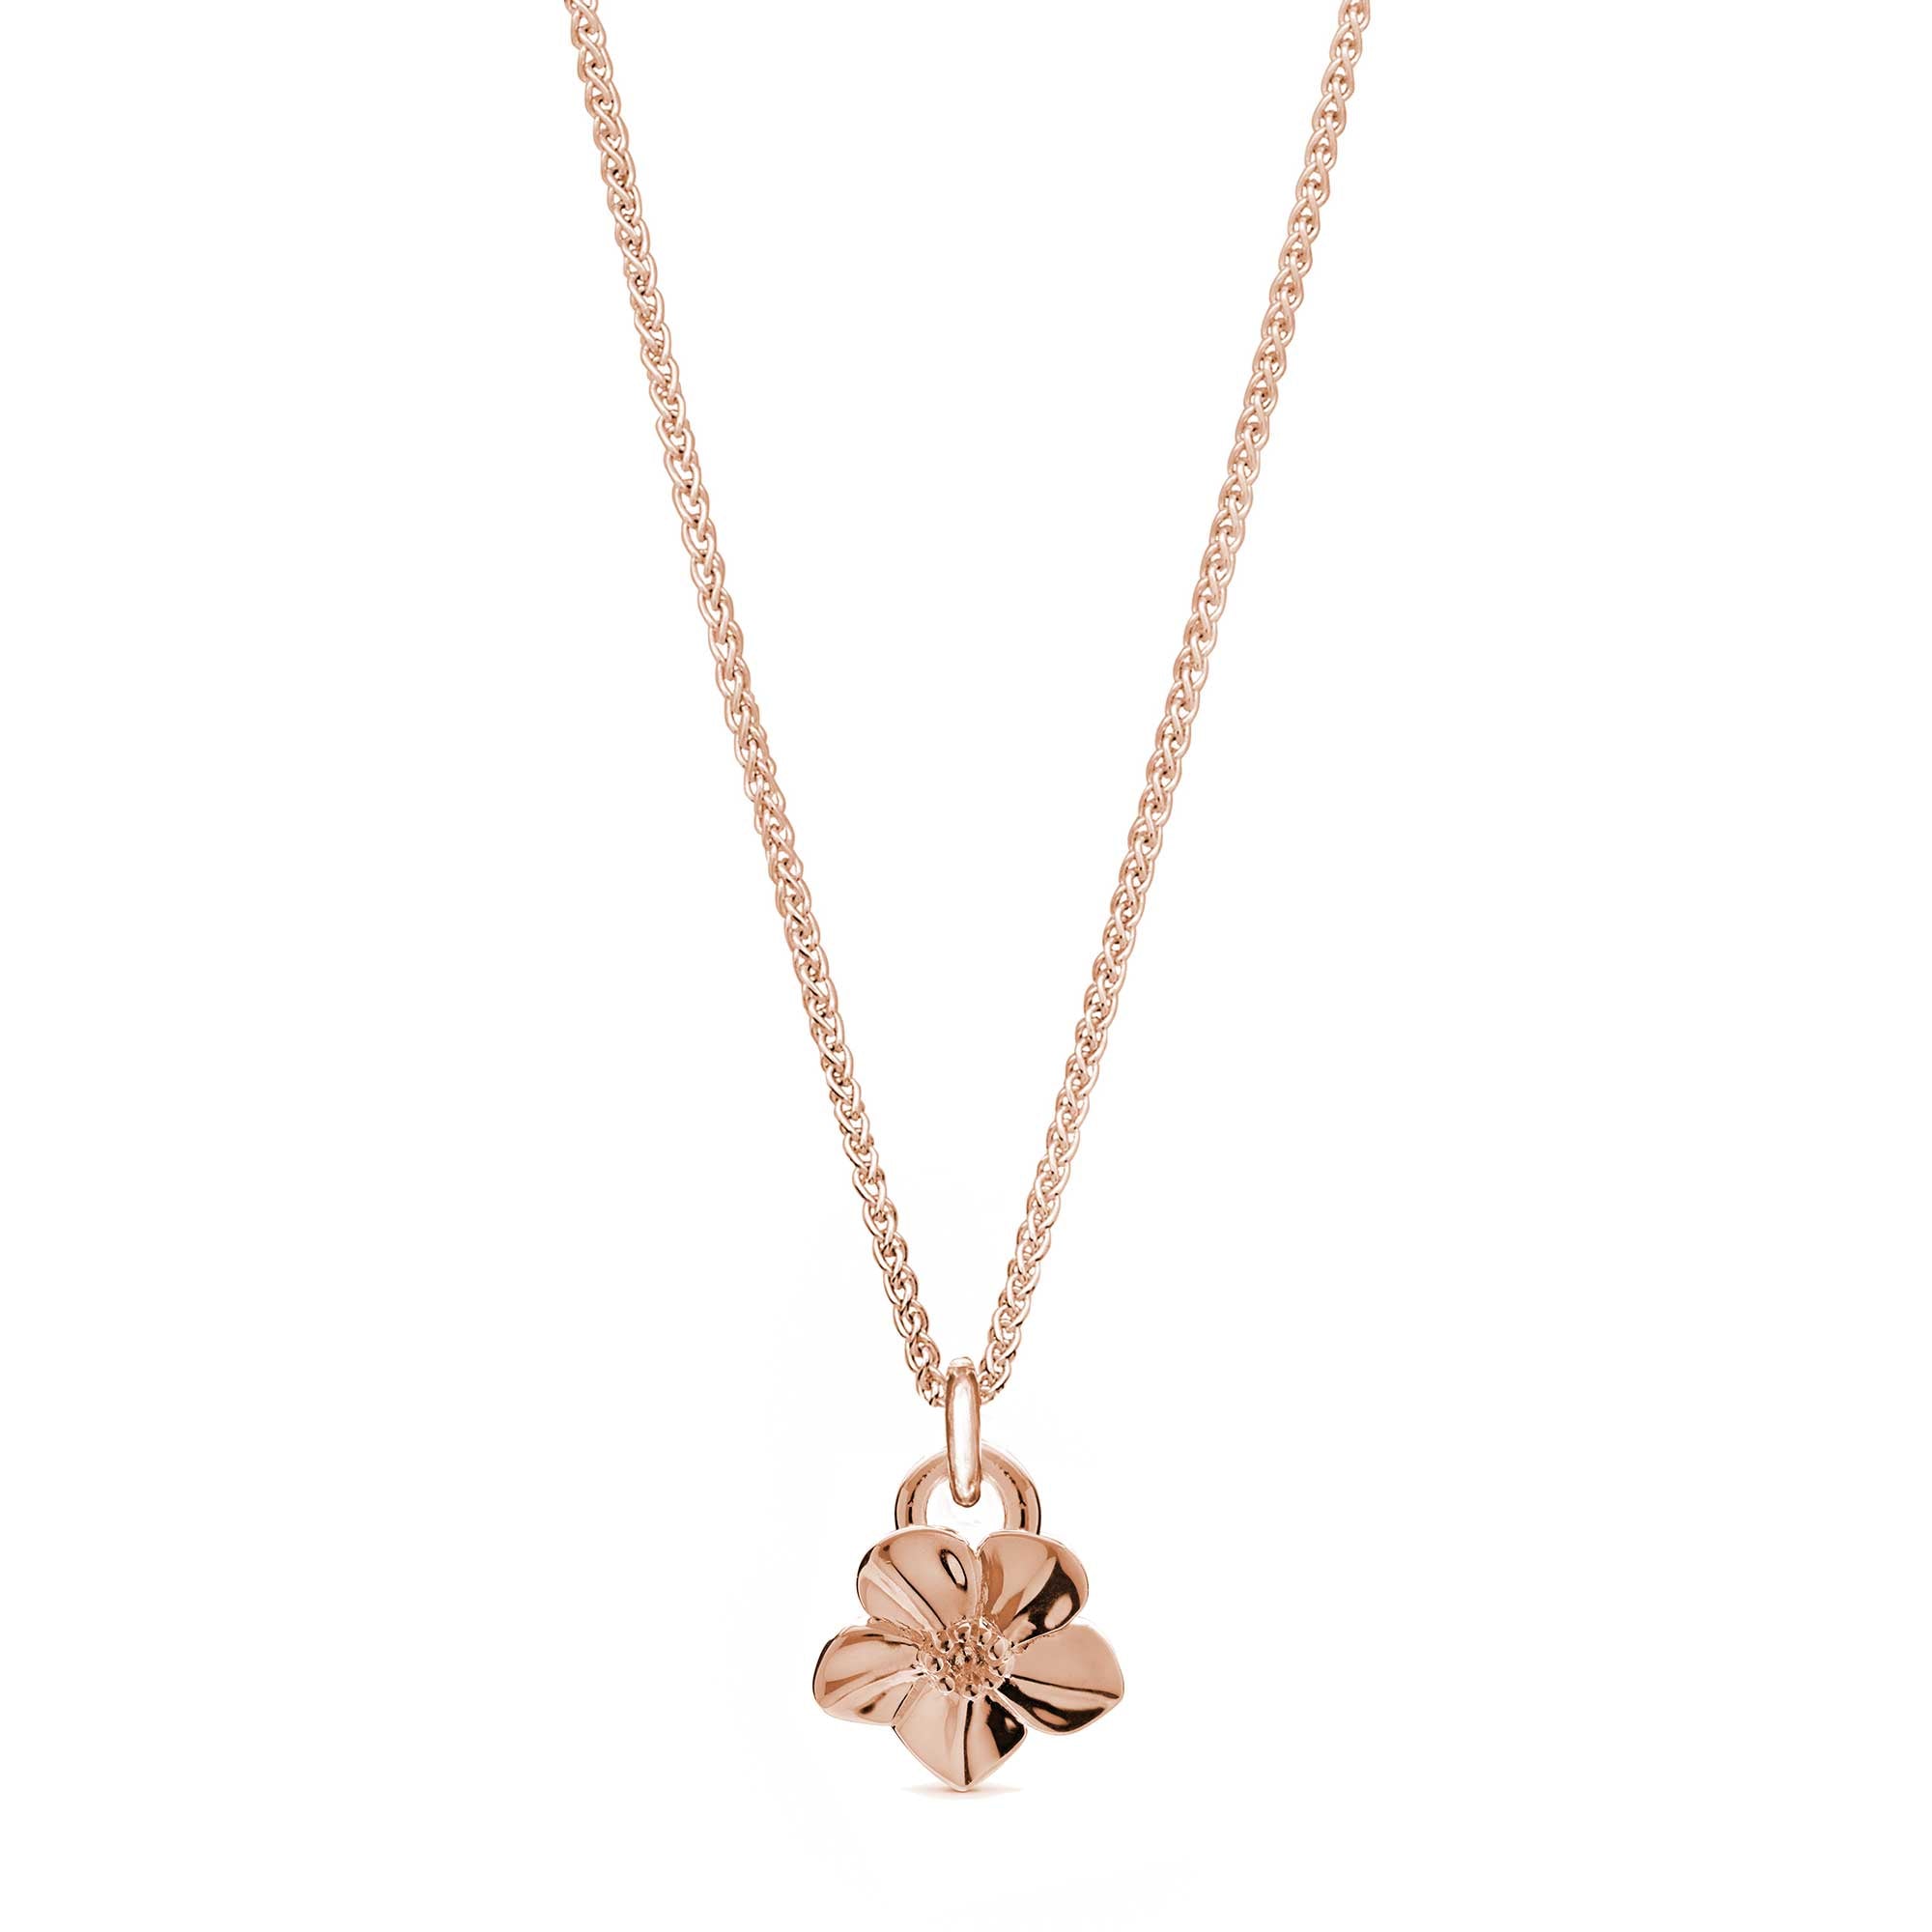 Solid rose gold forget me not flower necklace Scarlett Jewellery